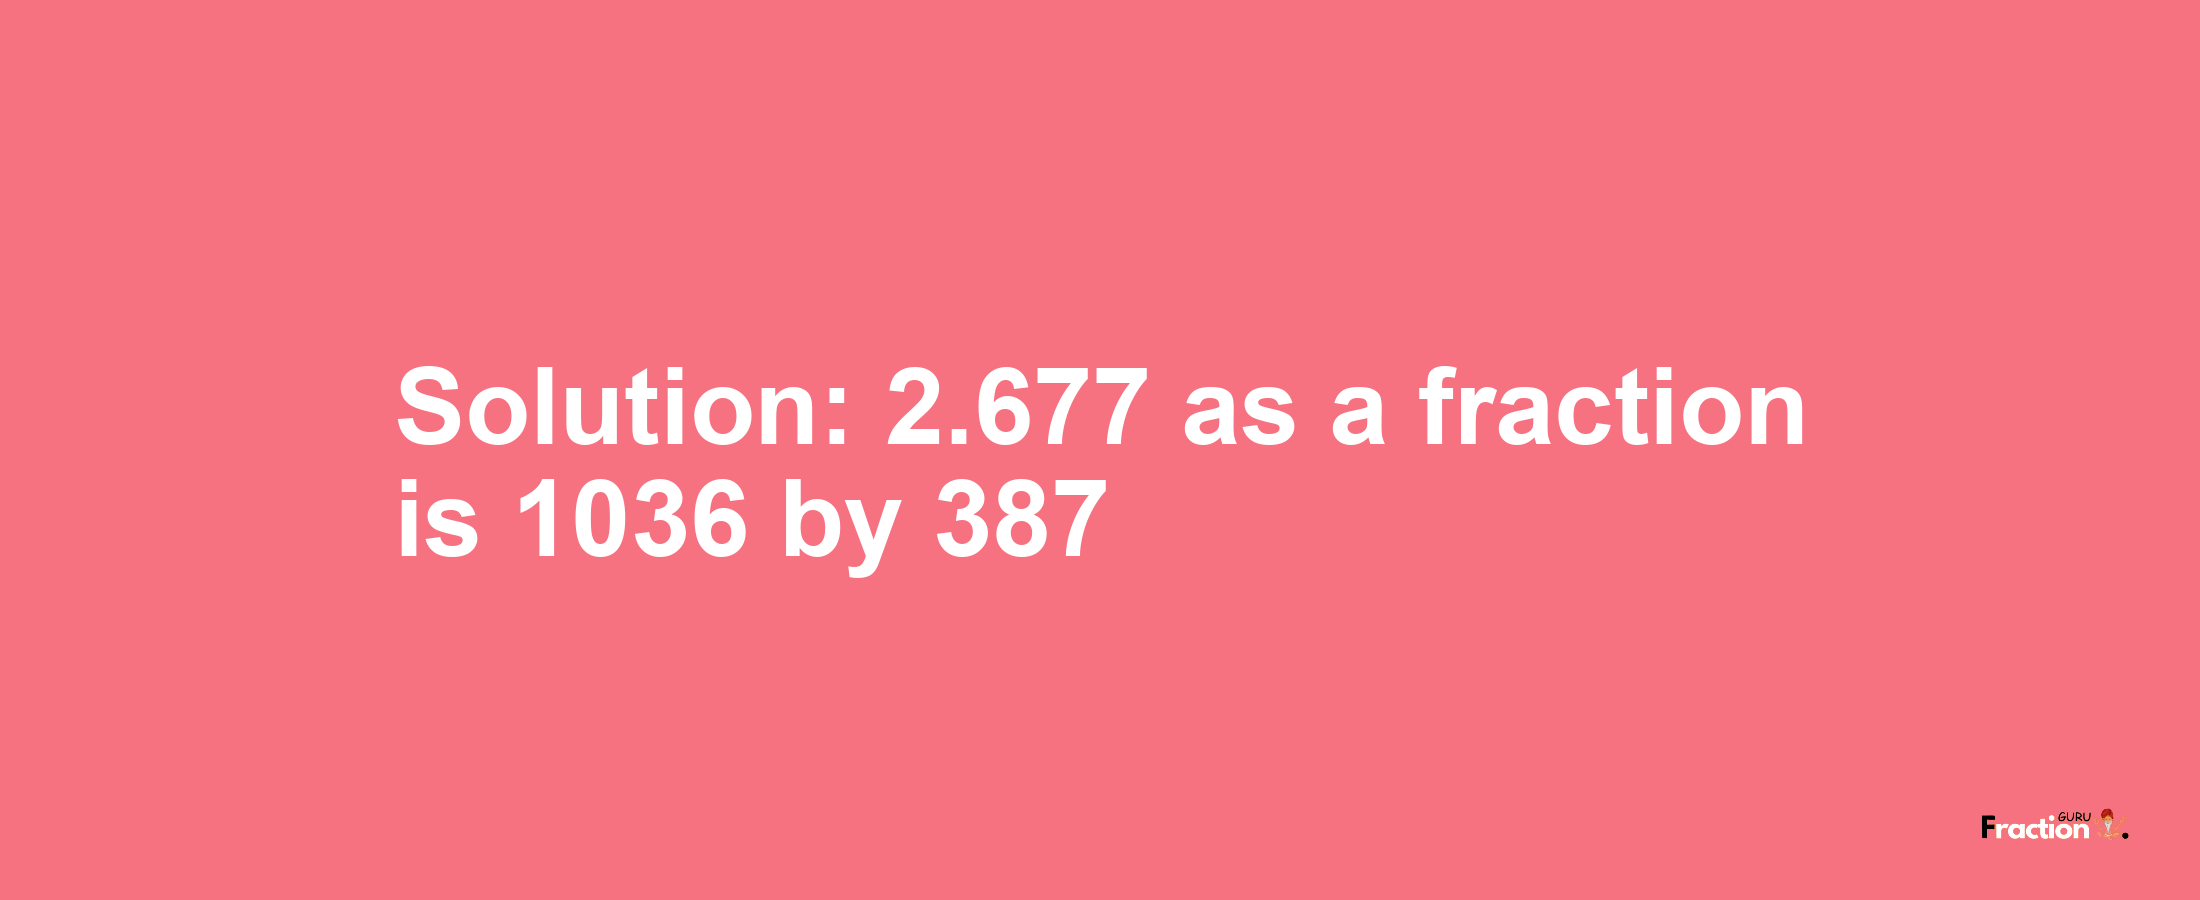 Solution:2.677 as a fraction is 1036/387